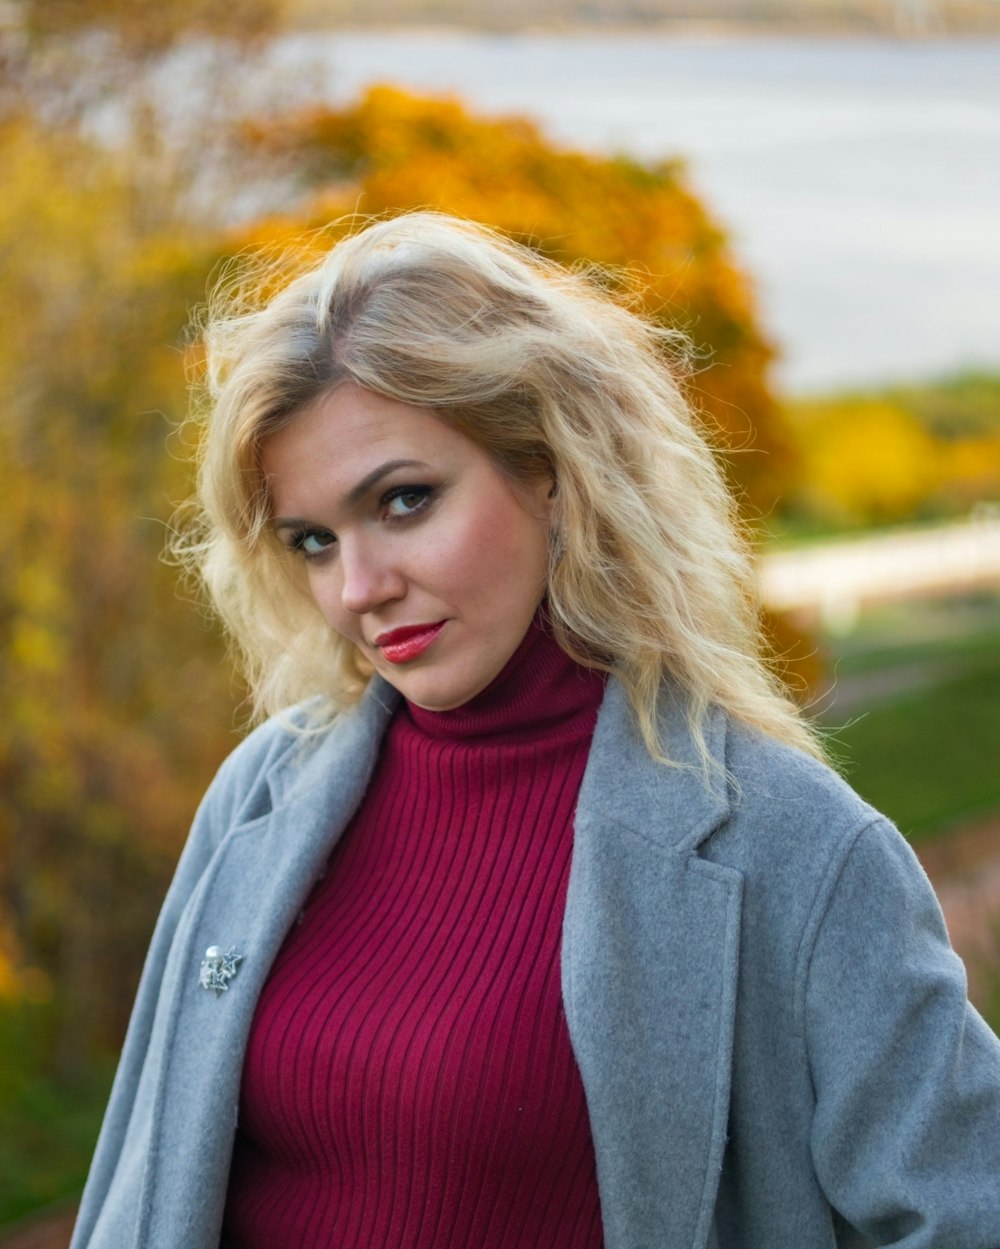 a woman with blonde hair wearing a red sweater and a gray coat